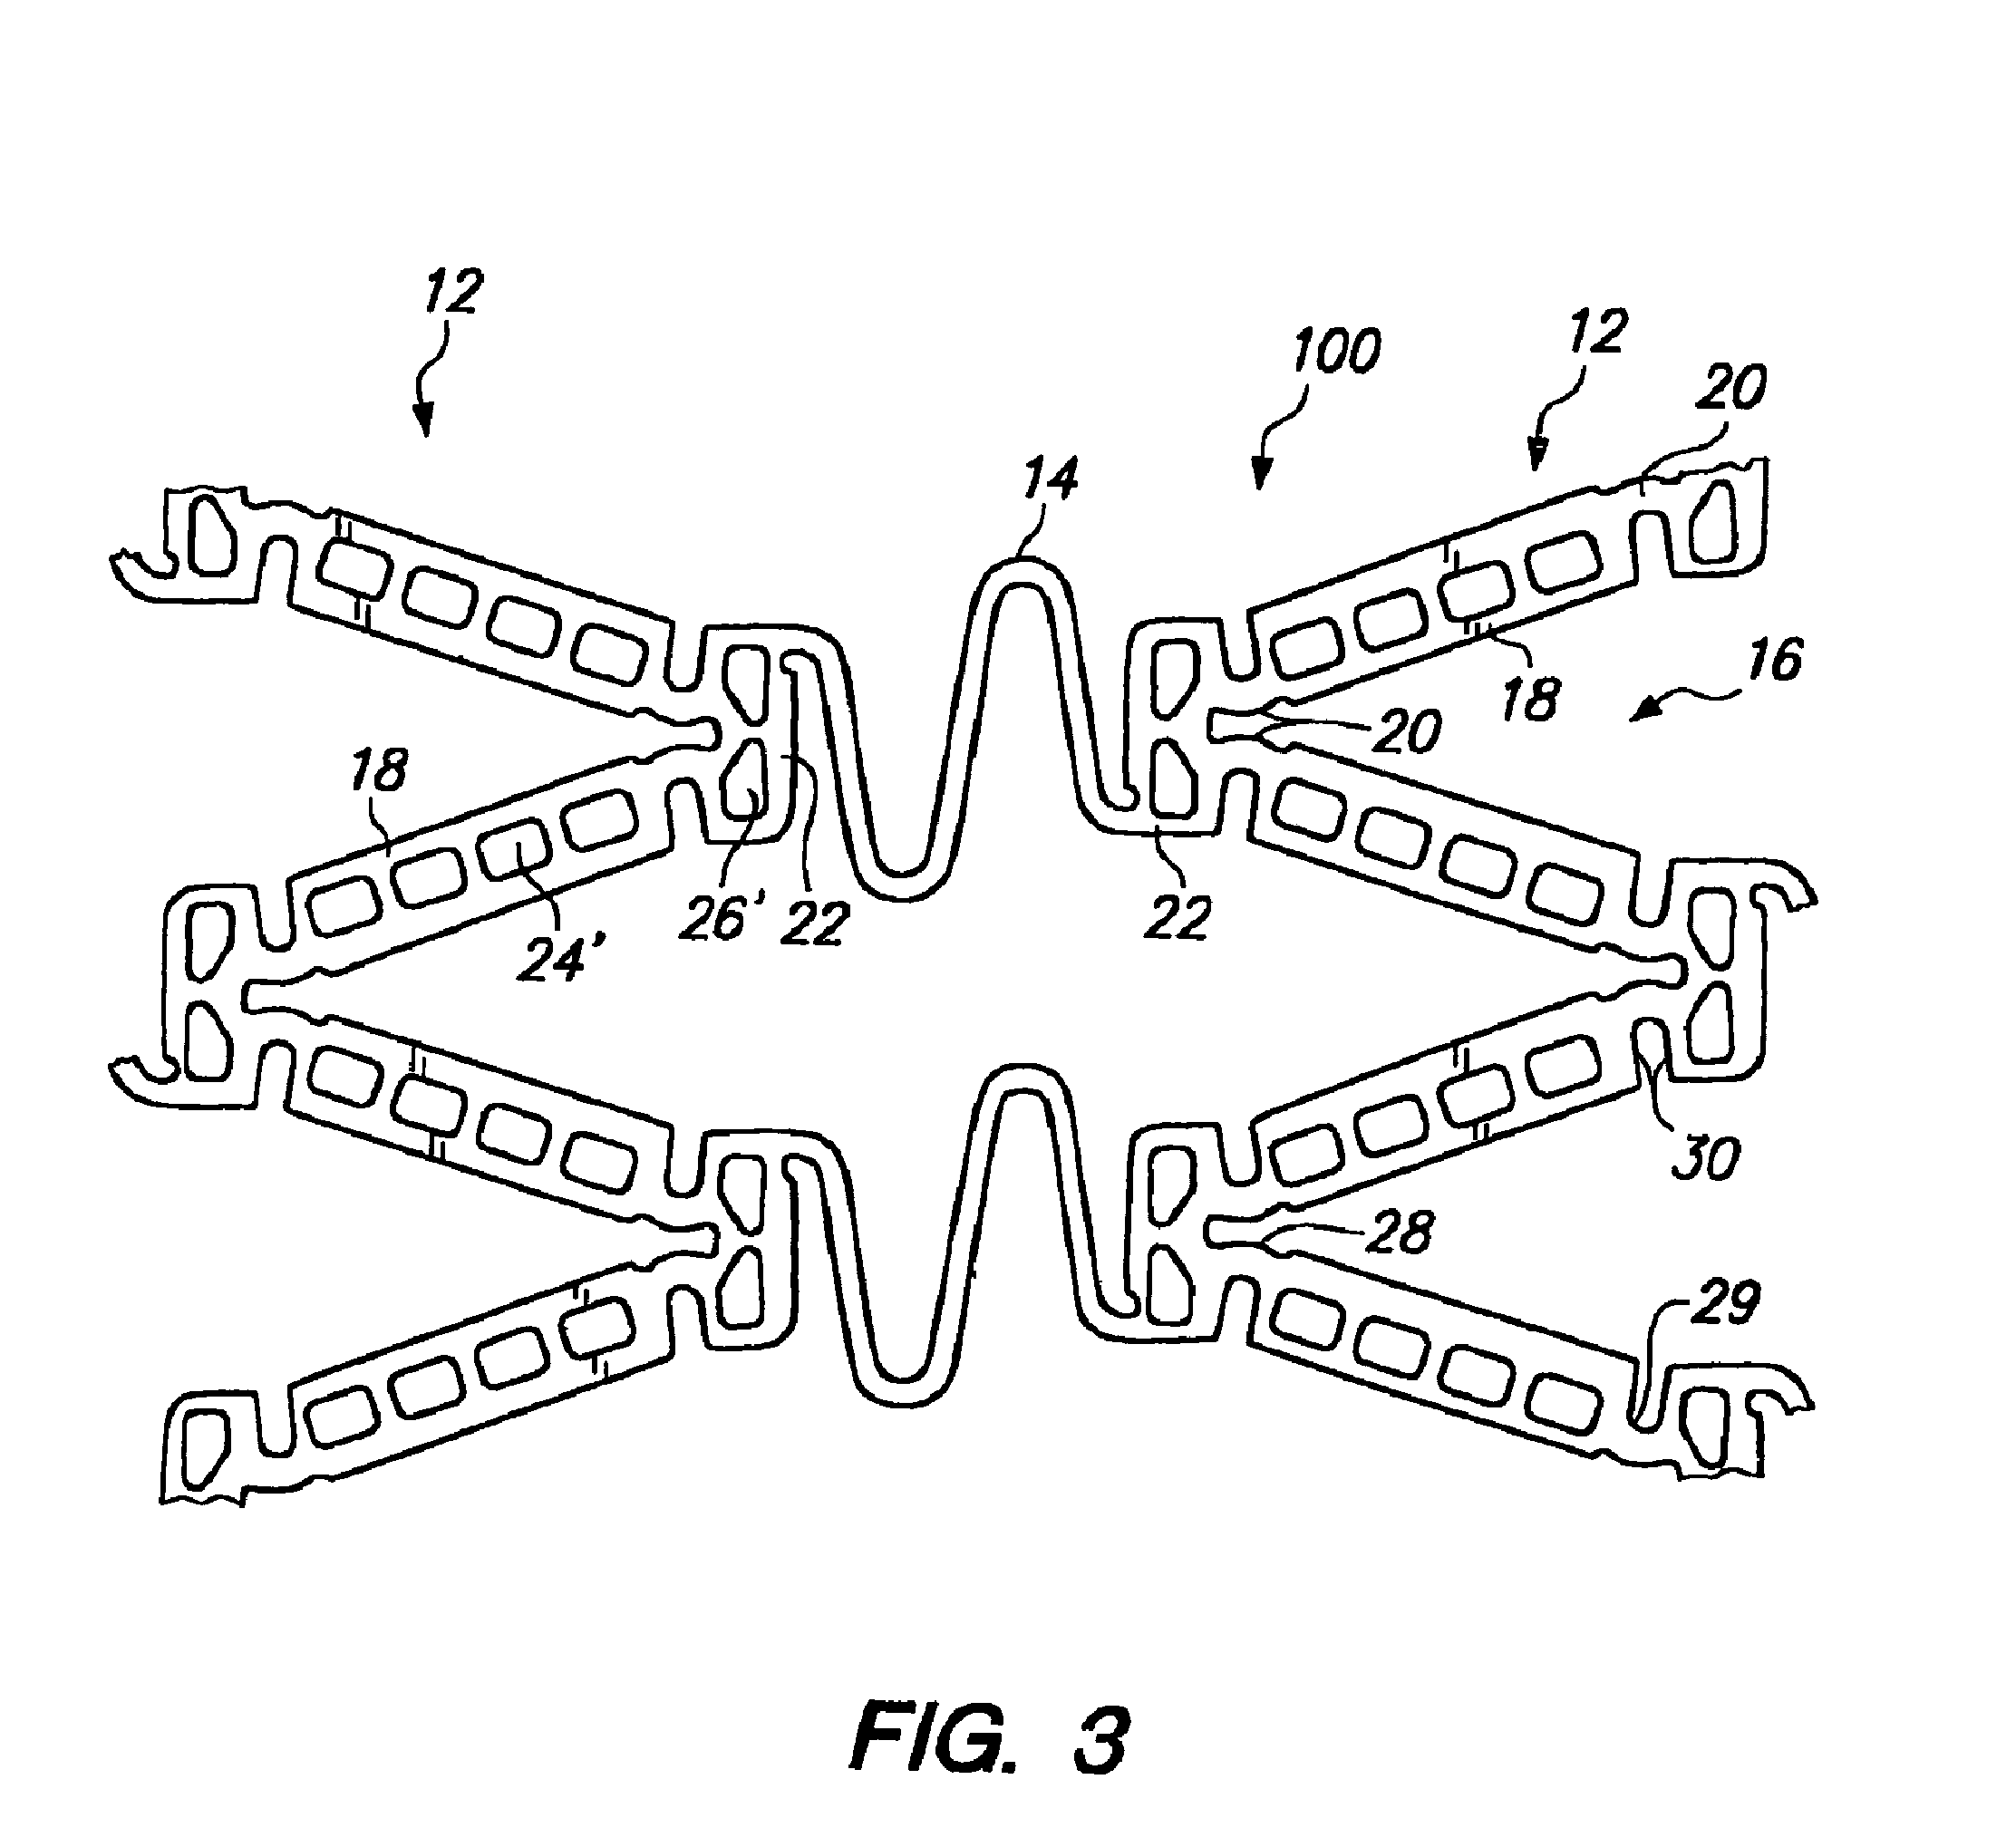 Expandable medical device with beneficial agent concentration gradient